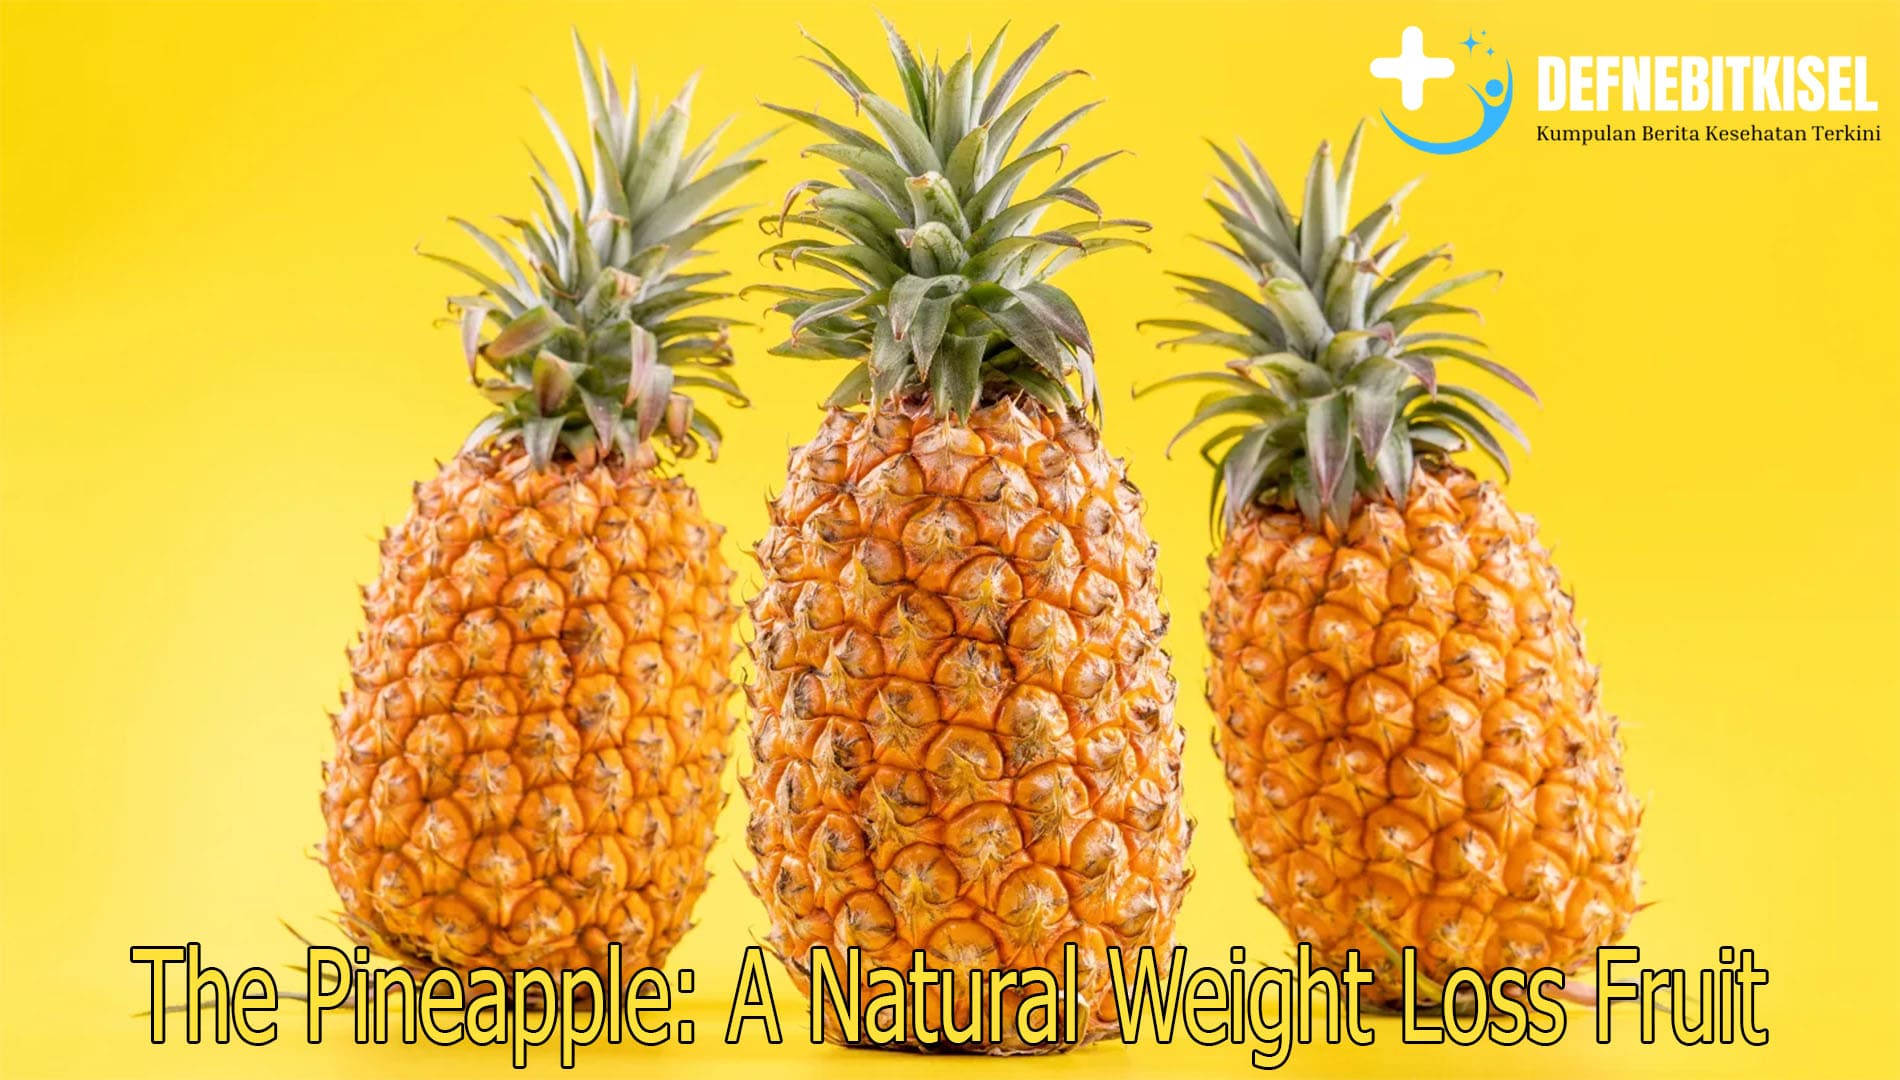 The Pineapple: A Natural Weight Loss Fruit